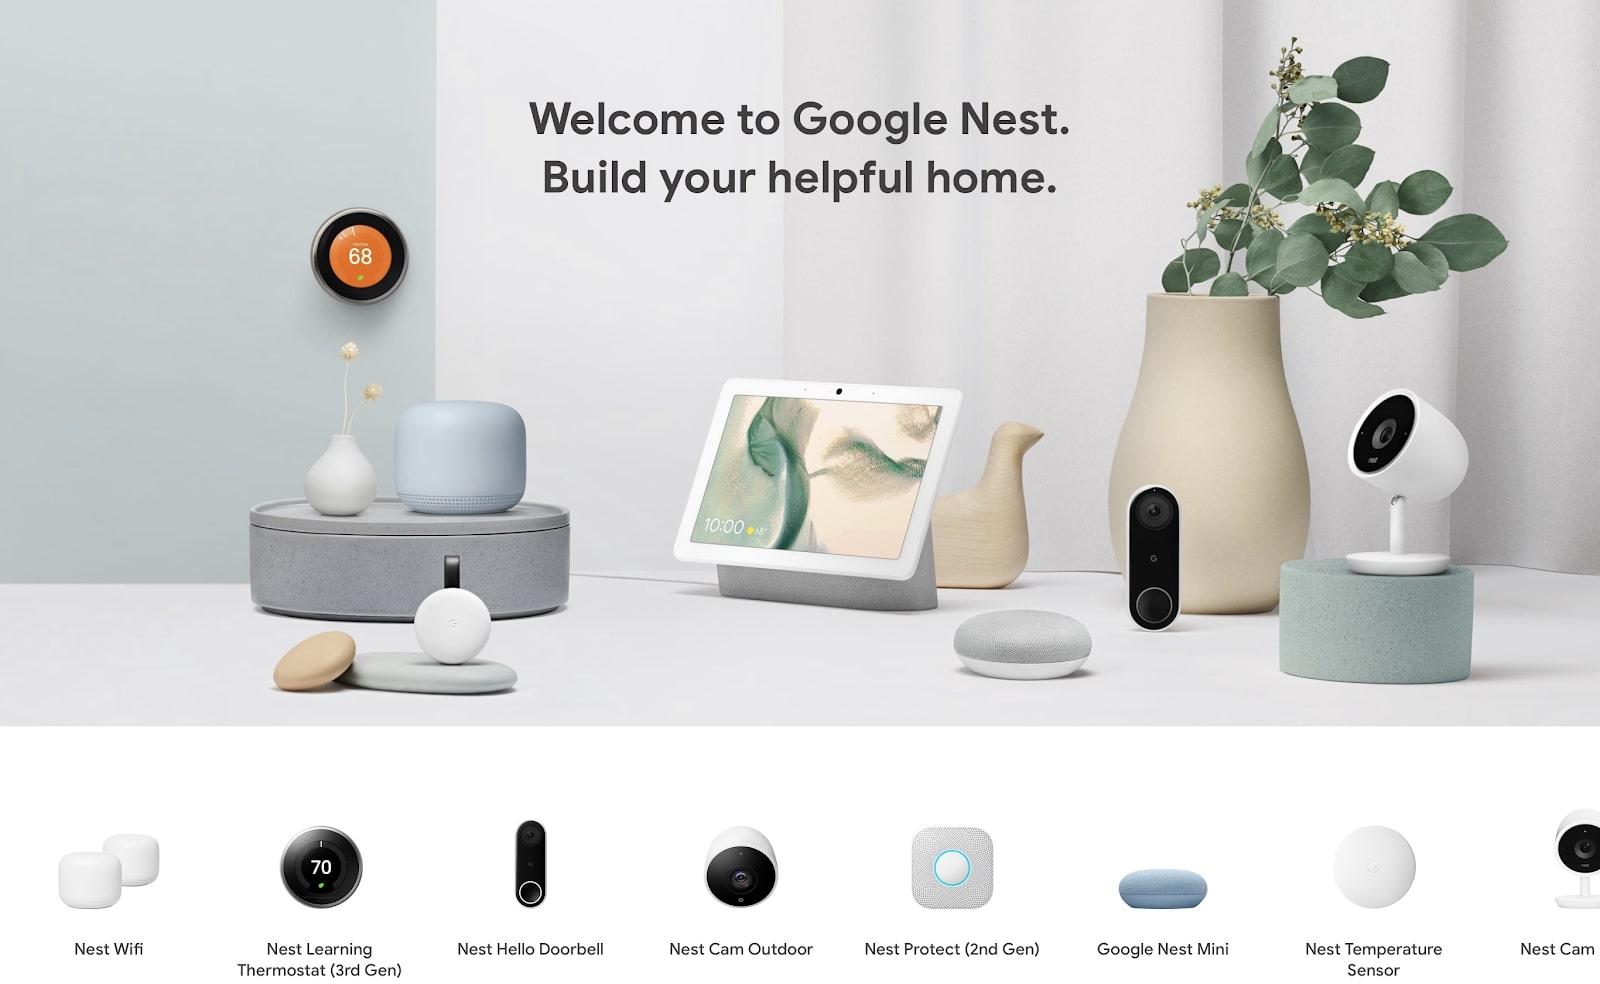 Google Nest Security & Privacy Features - Google Safety Center